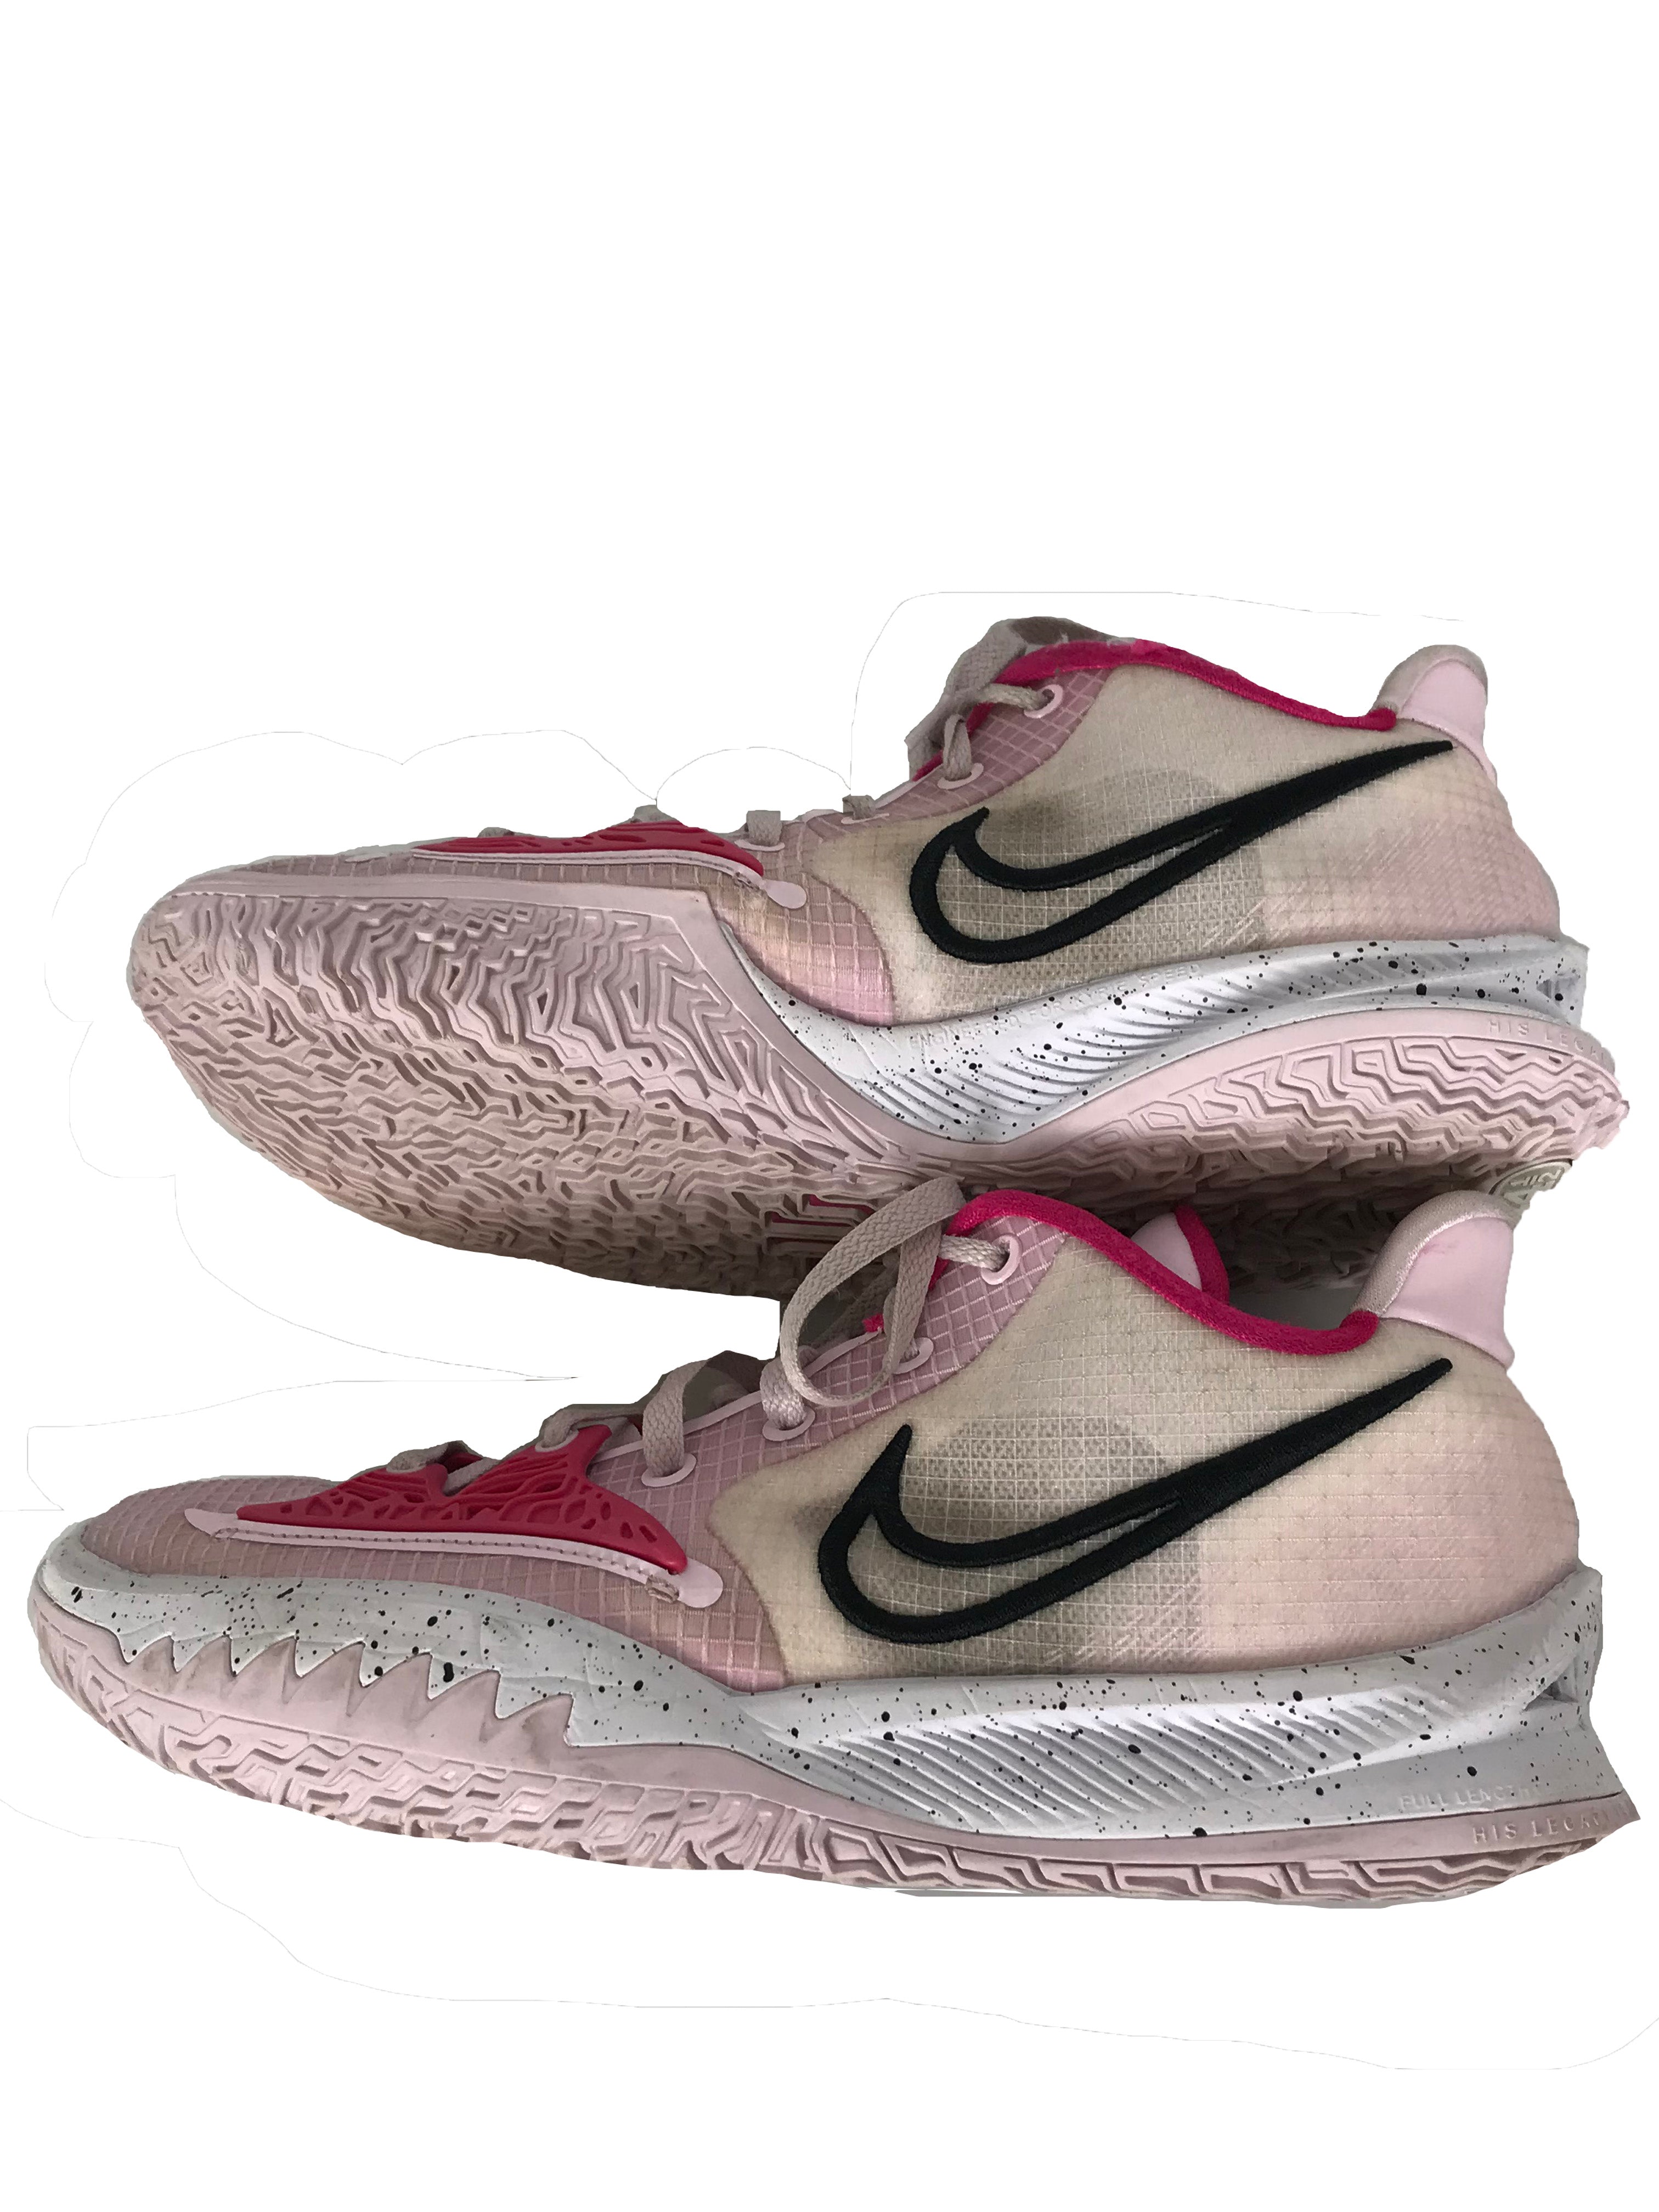 Nike Pink Kyrie 4 Low Vivid Pink Basketball Shoes Men's 10.5